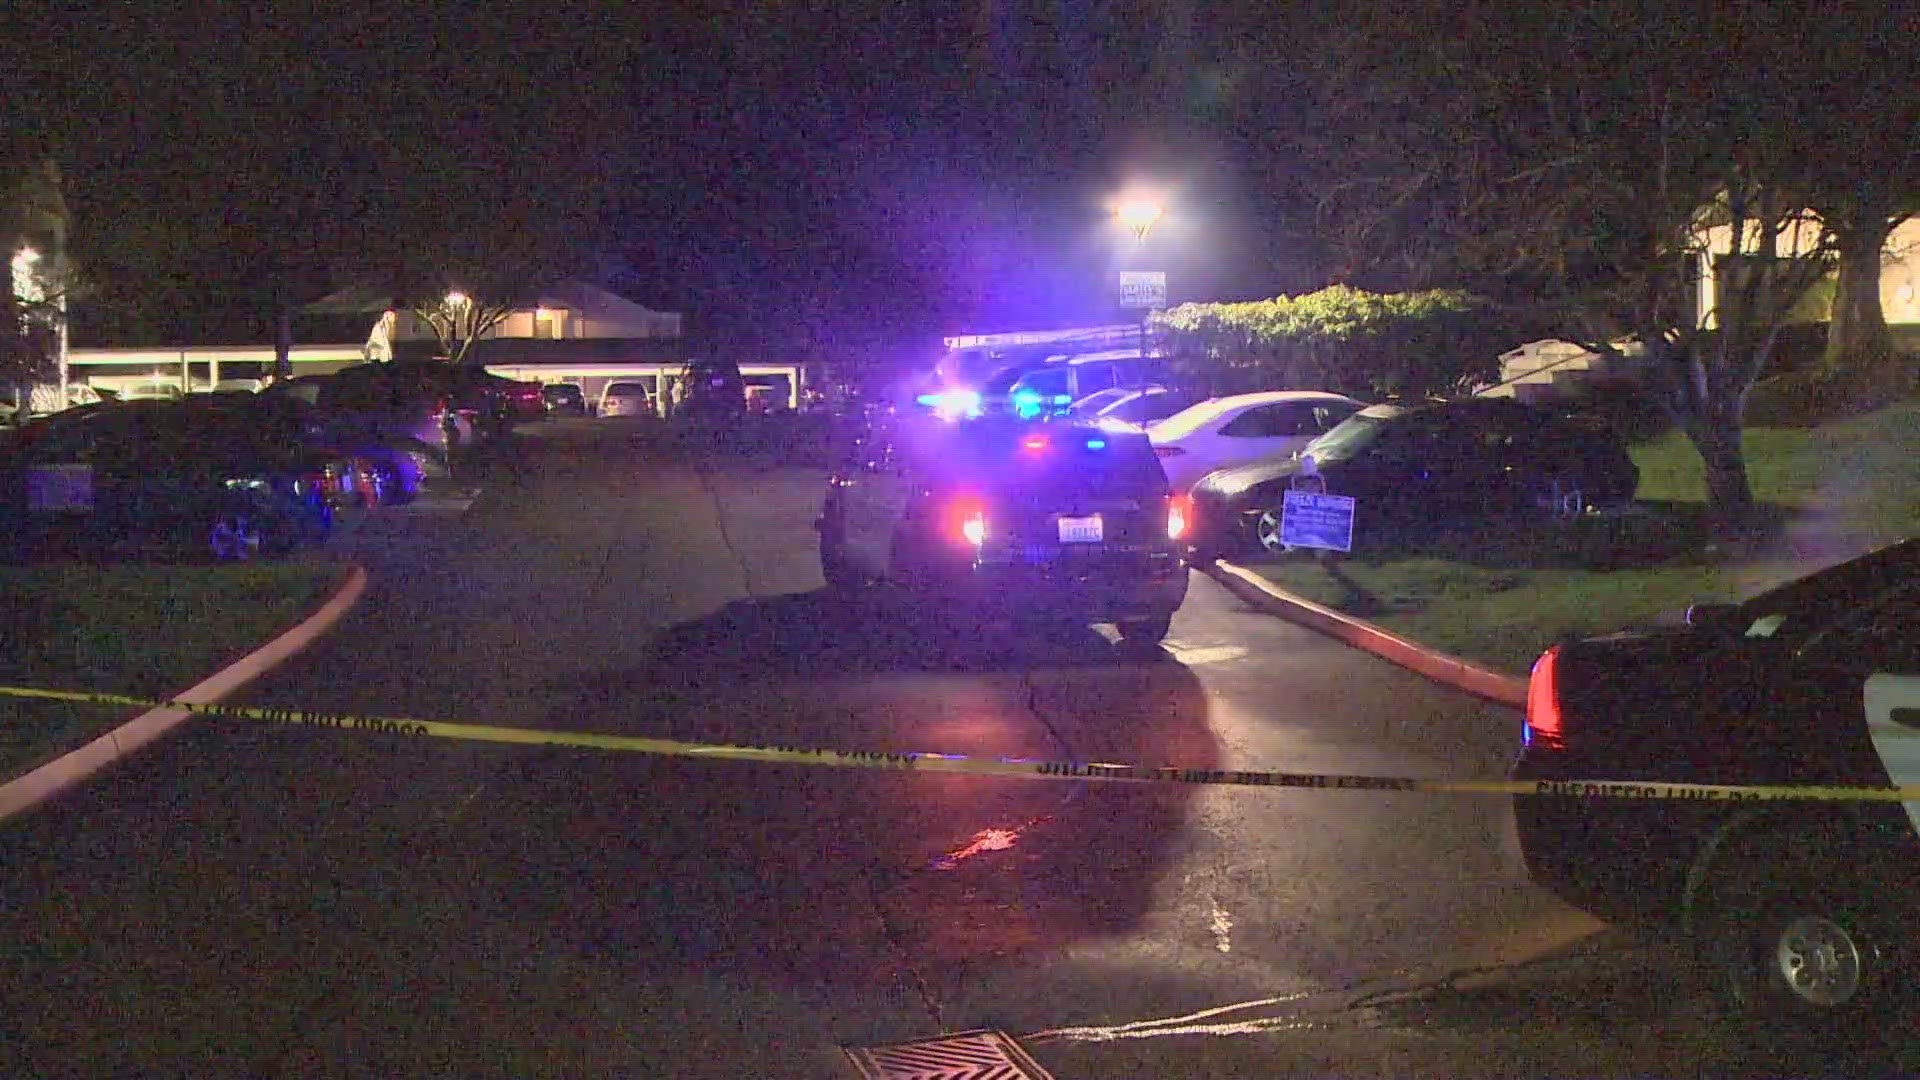 A Snohomish Co. deputy shot a domestic violence suspect that was holding a woman and child against their will in Bothell